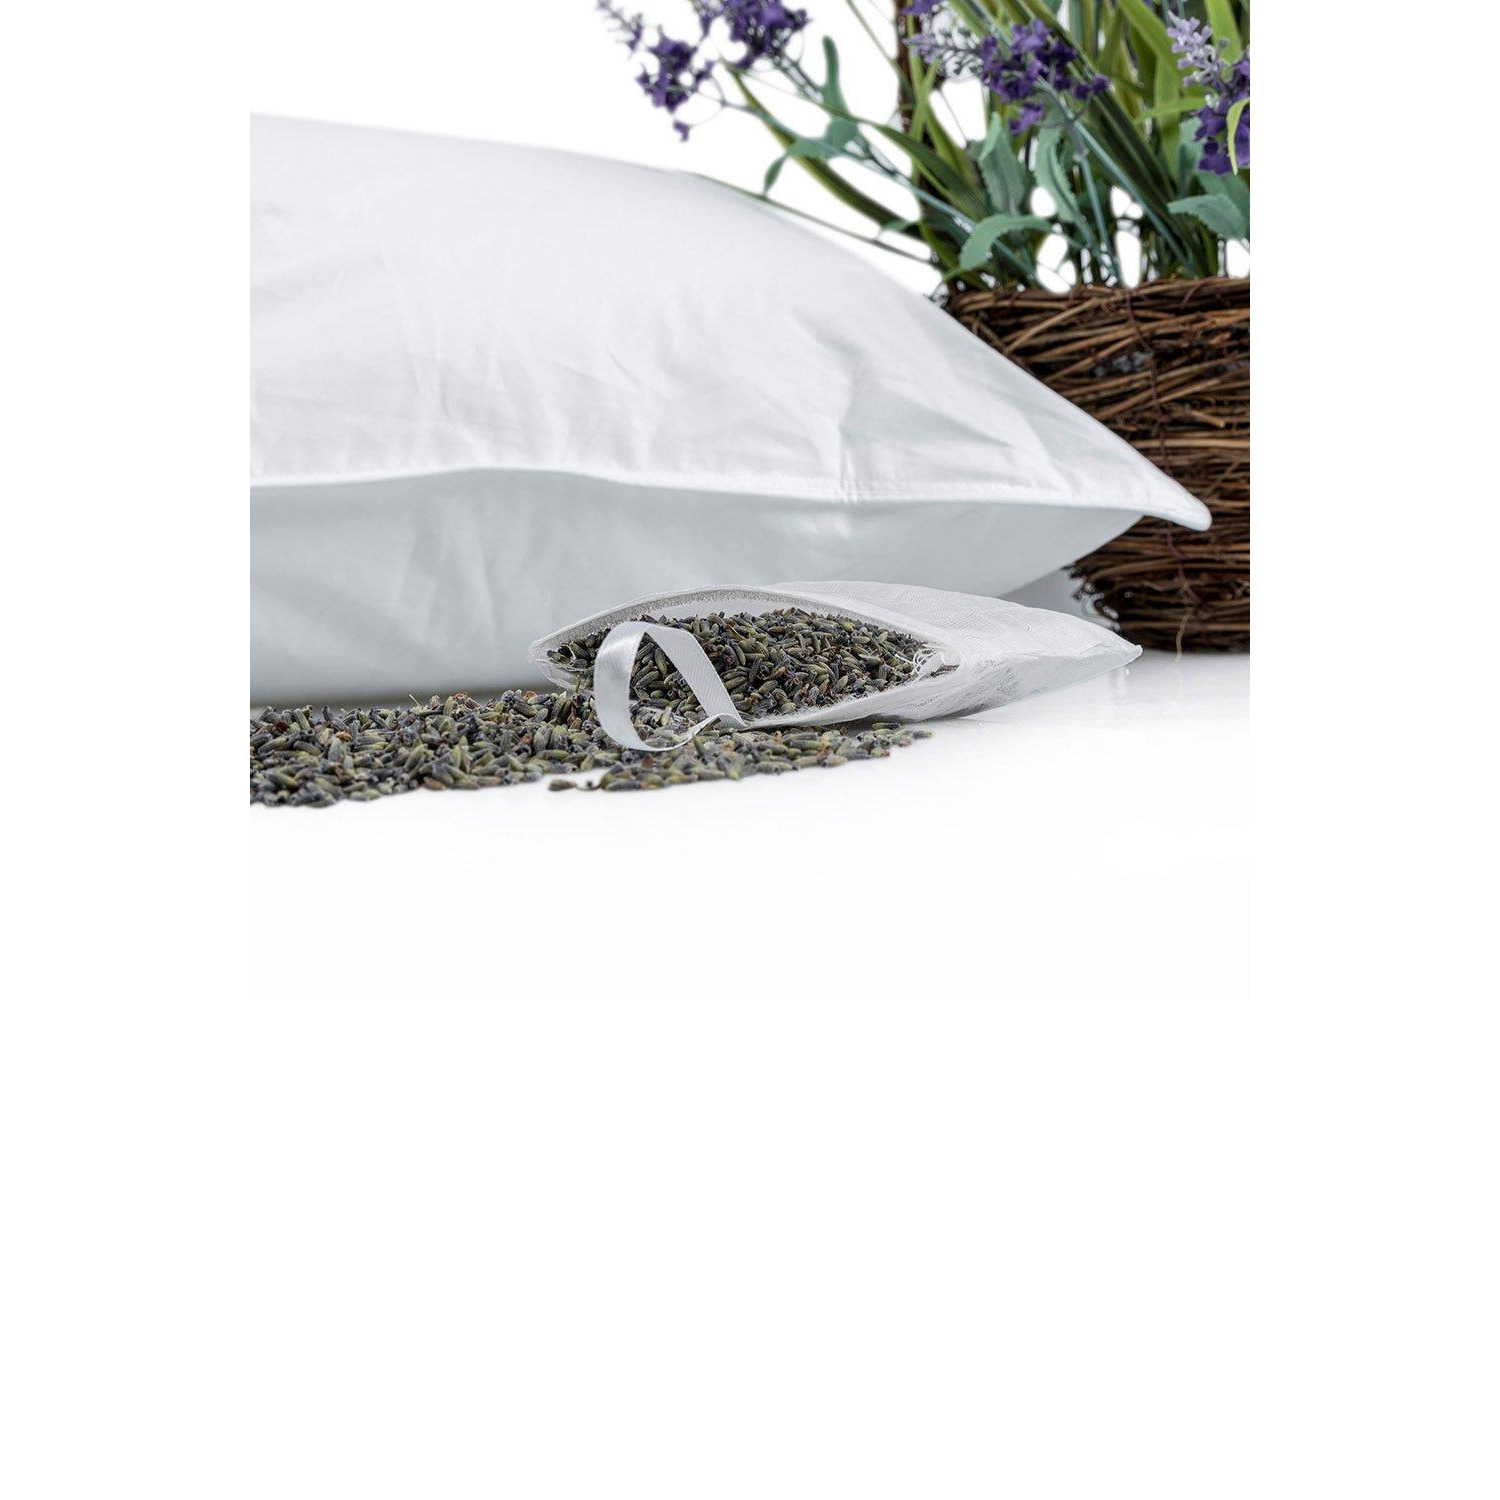 Set of Two Dried Lavender Filled Pouches for Lavender Pillow - image 1